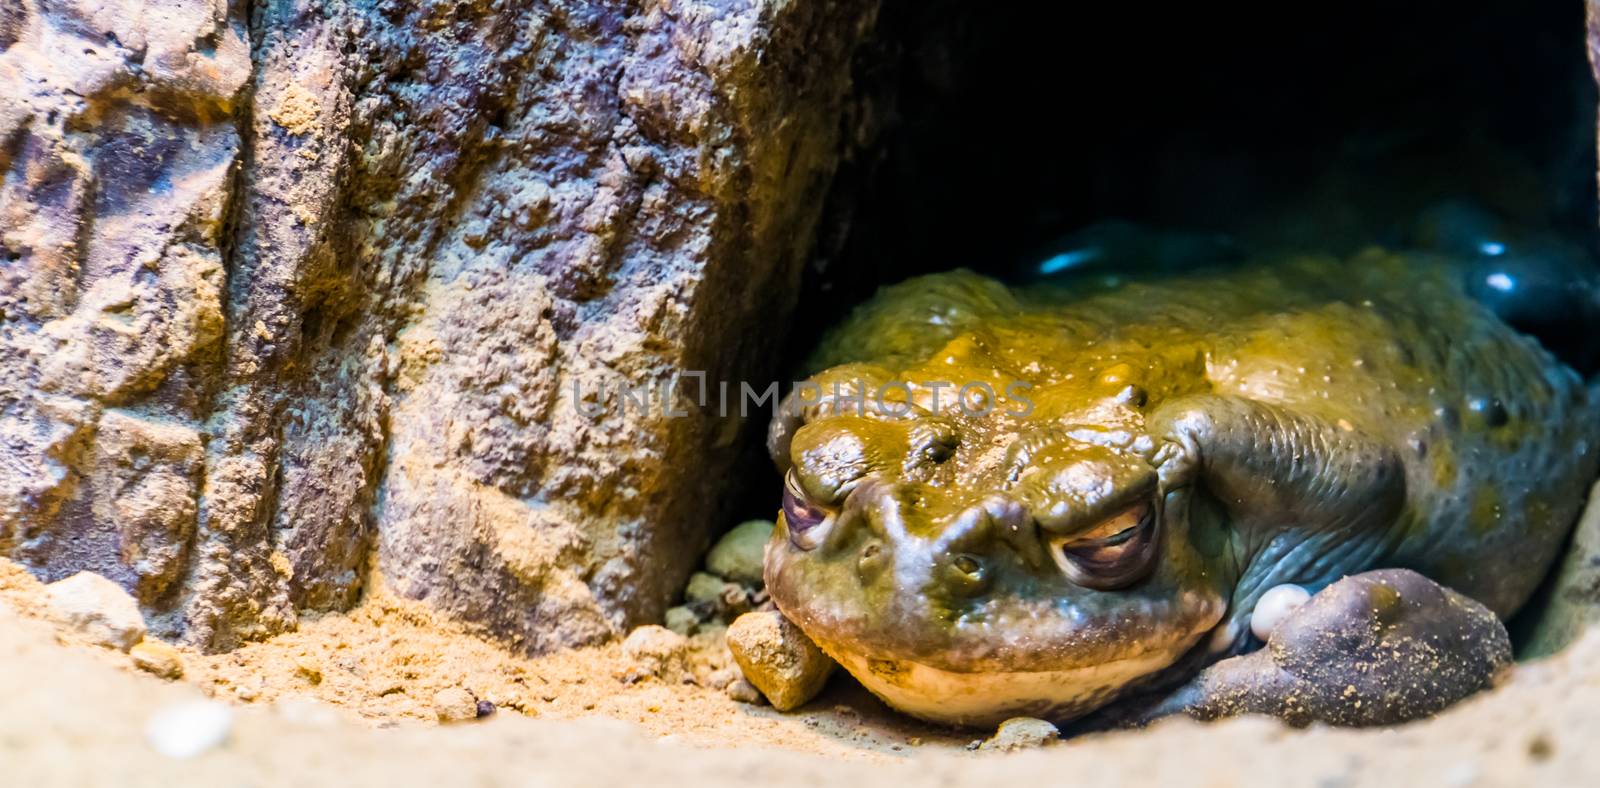 closeup of a colorado river toad hiding under a rock, tropical amphibian specie from mexico by charlottebleijenberg